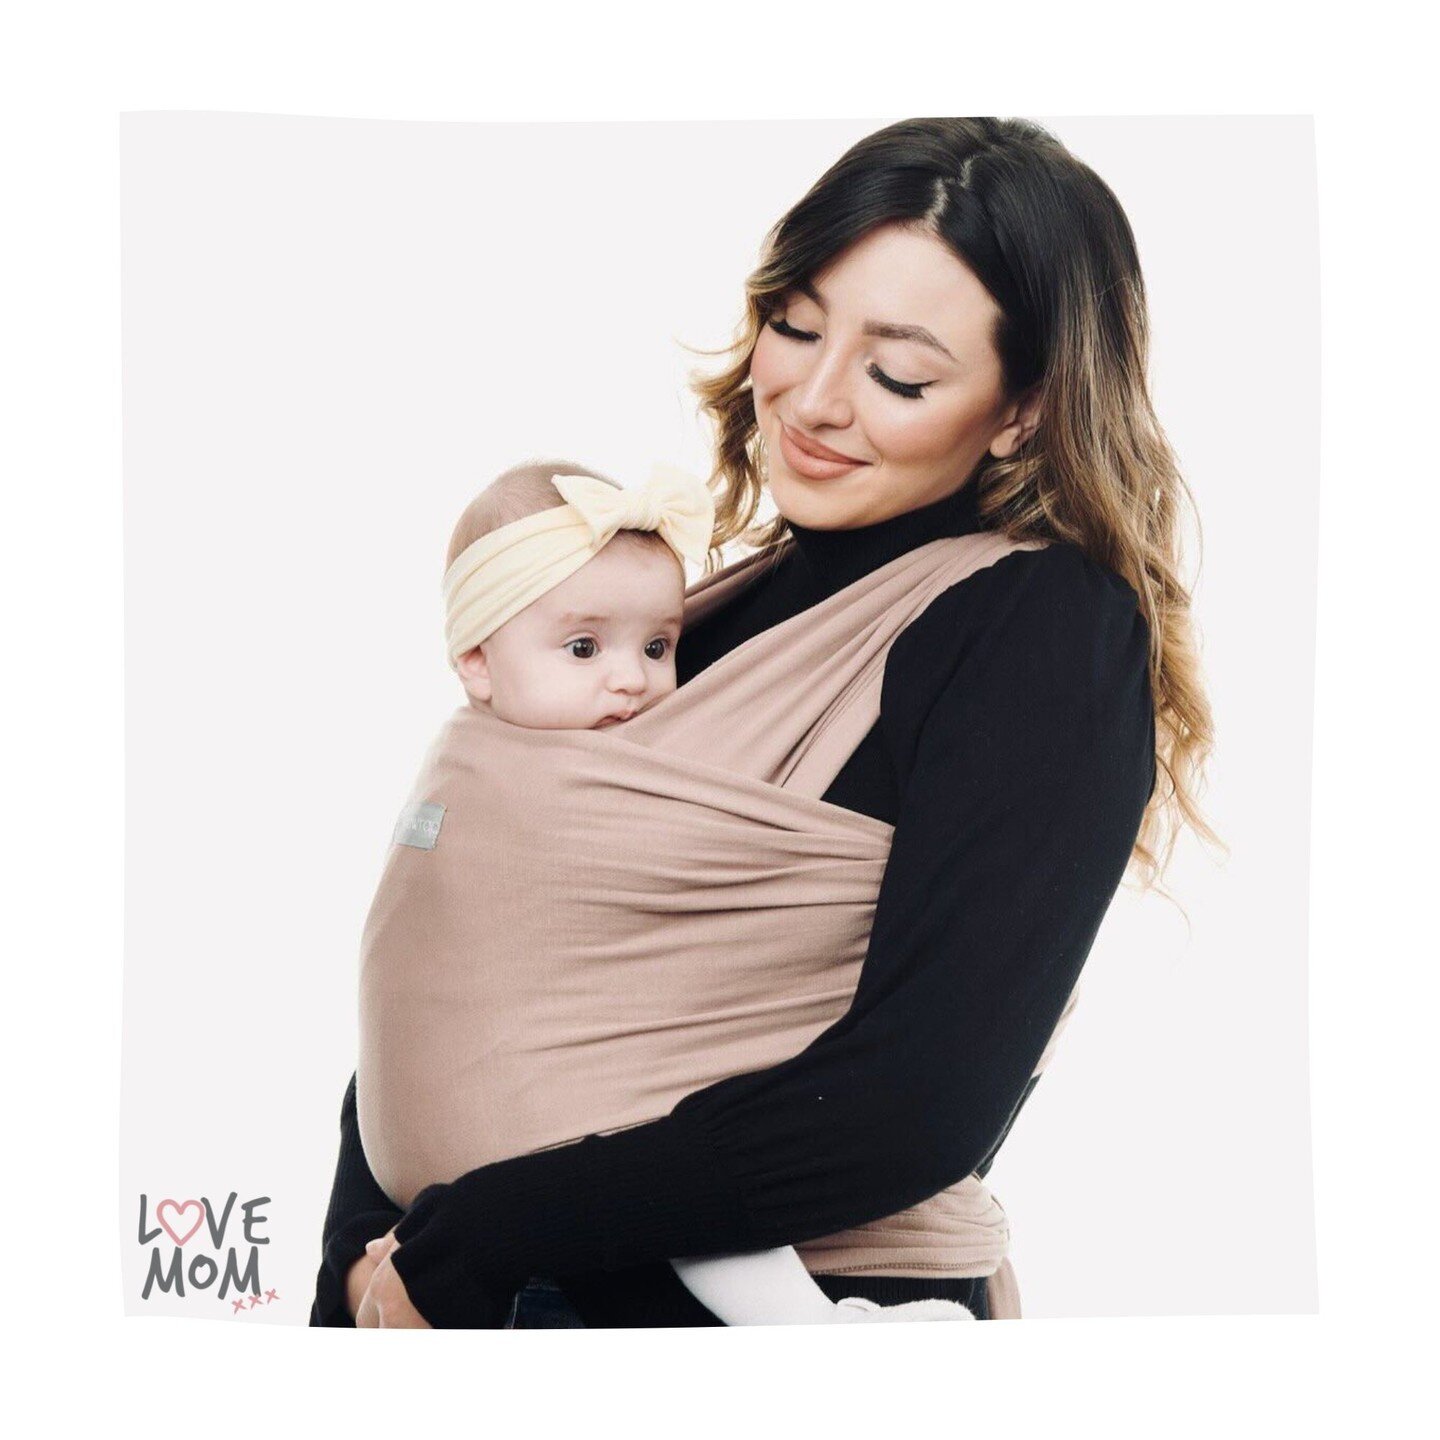 Our Mocha Cream Wrap is the perfect understated, subtle colour that you can wear every day. The softness of the cream truly gives you the feeling of calm.⁠
⁠
One size fits all meaning that it adapts to your growing baby and to your postpartum body⁠
⁠